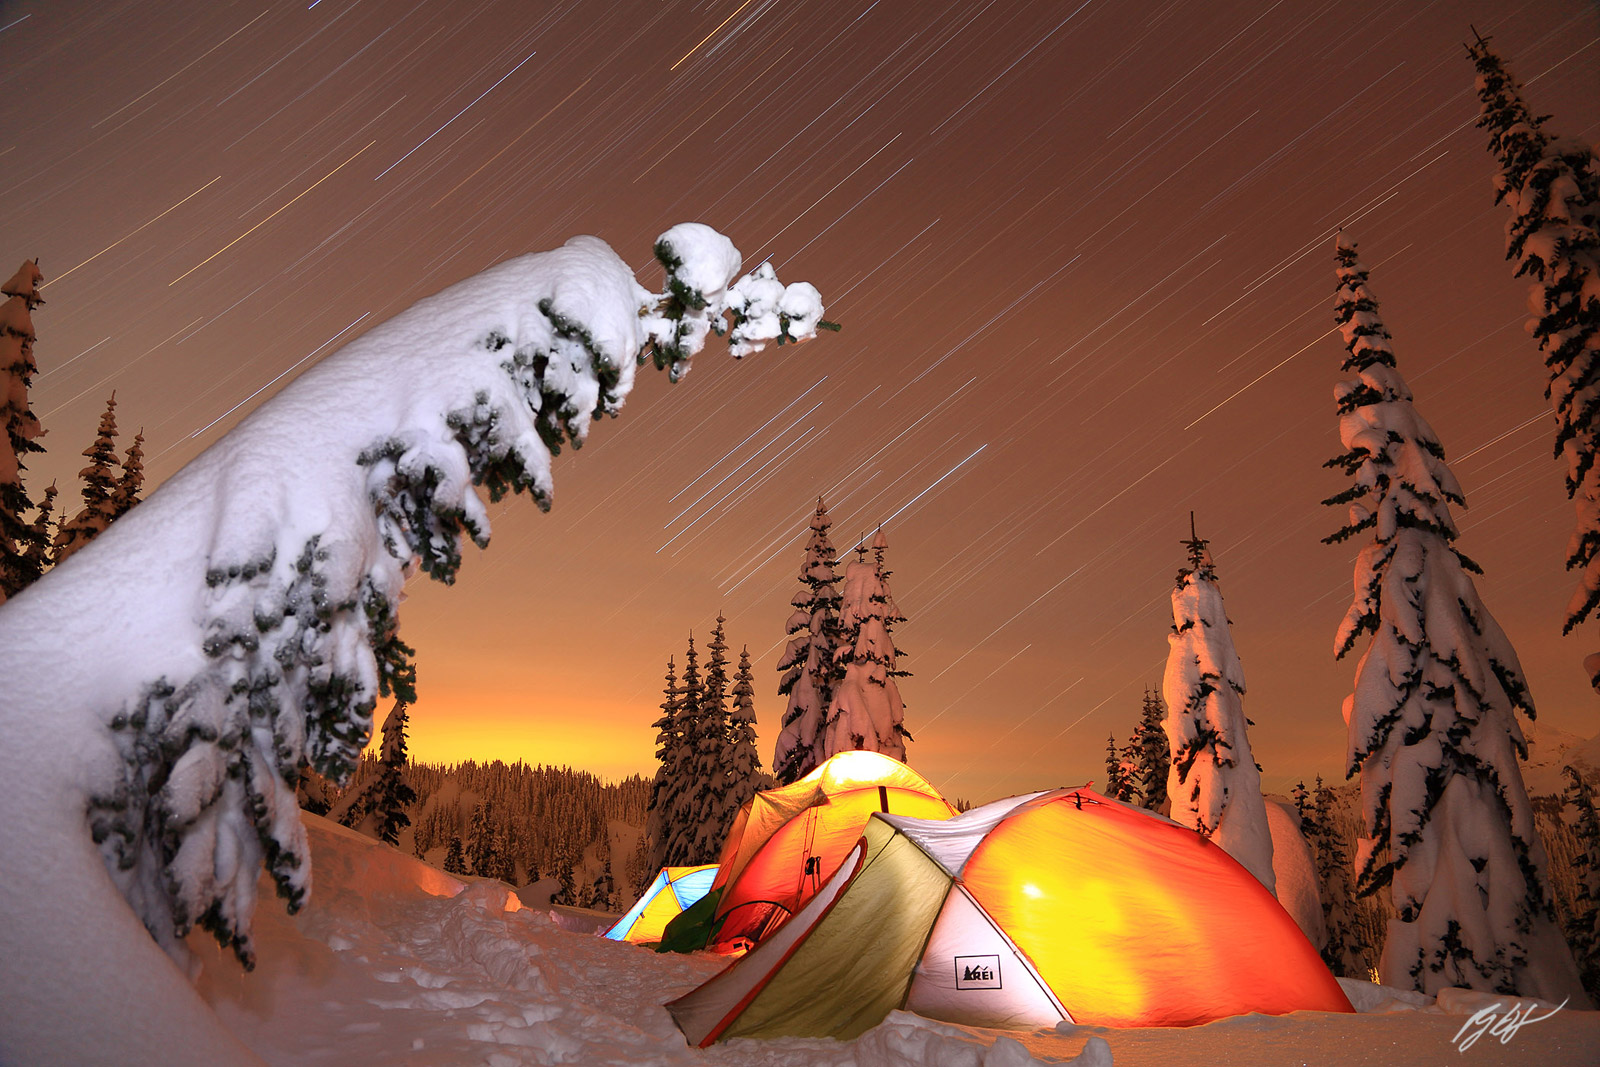 Star Trails and Winter Camp from Mt Rainer National Park in Washington